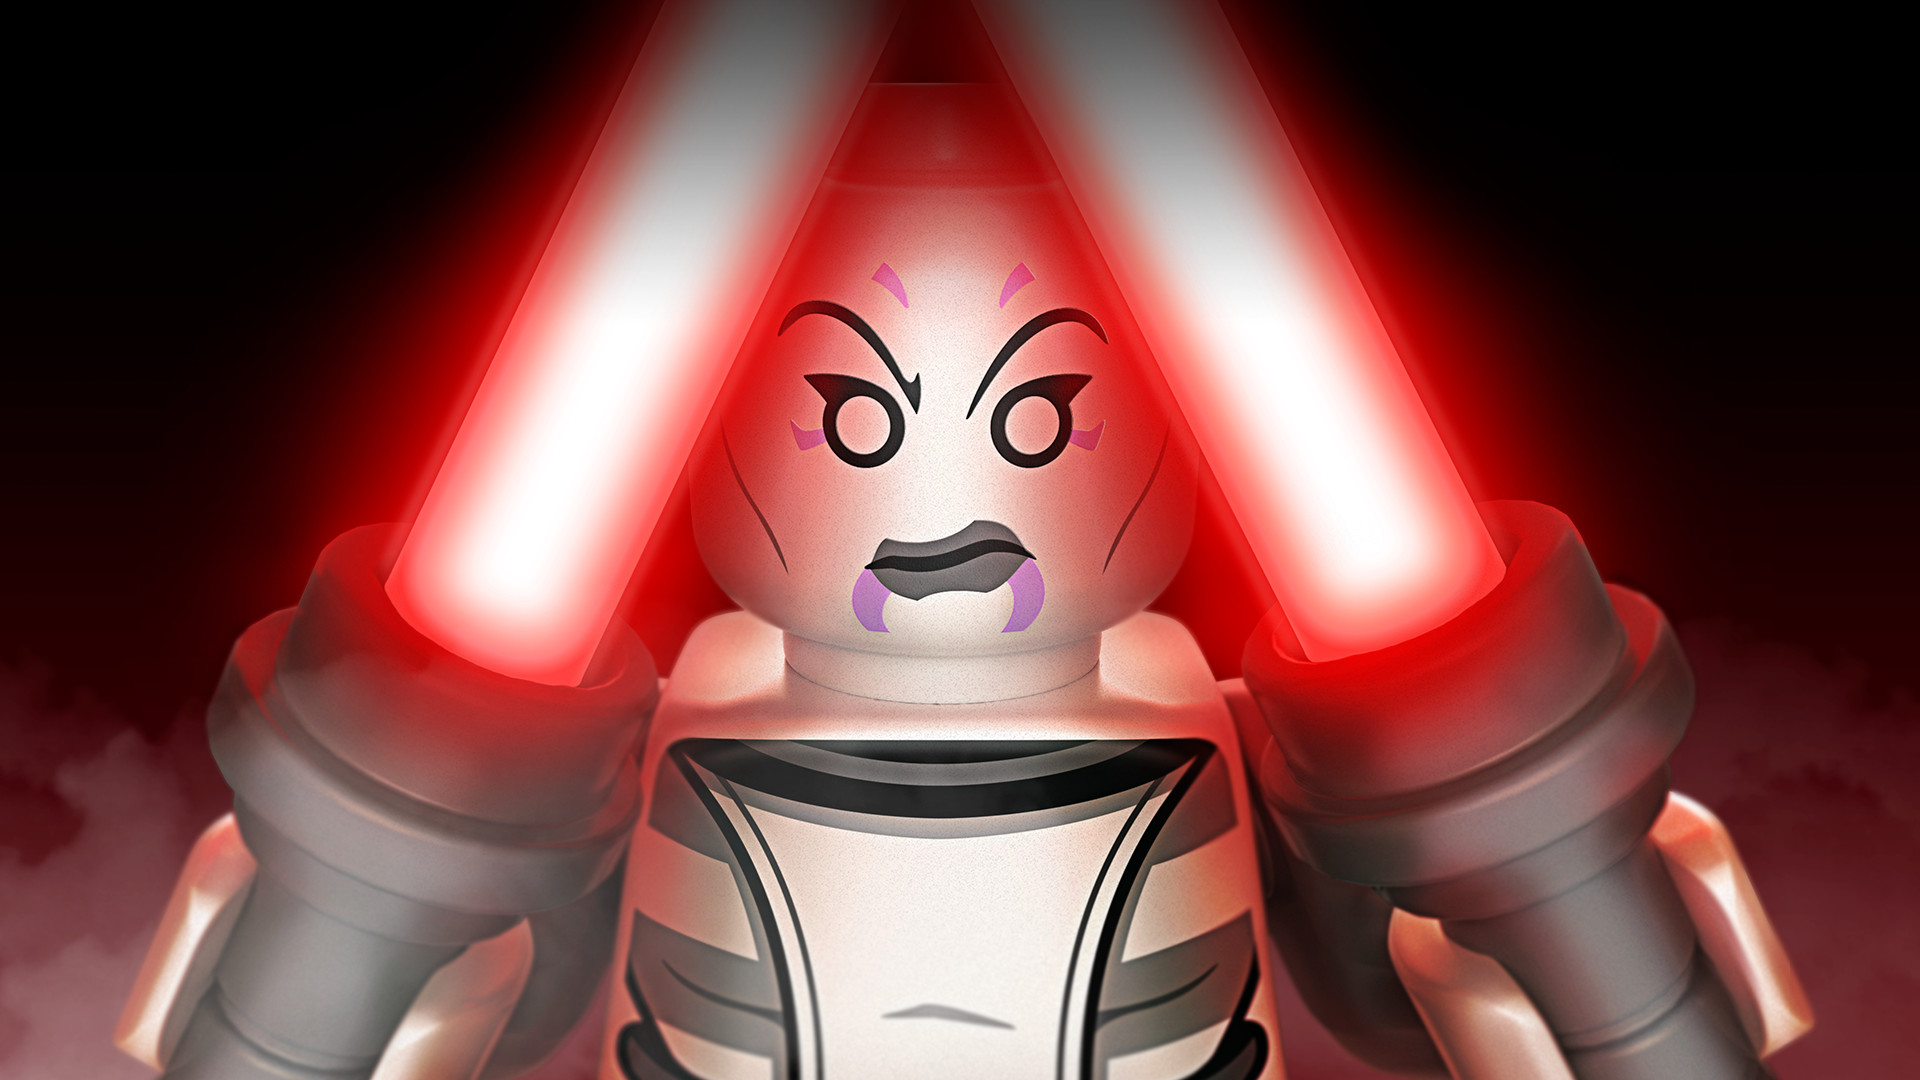 LEGO Star Wars: The Force Awakens - The Clone Wars Character Pack DLC Steam CD Key, $1.68